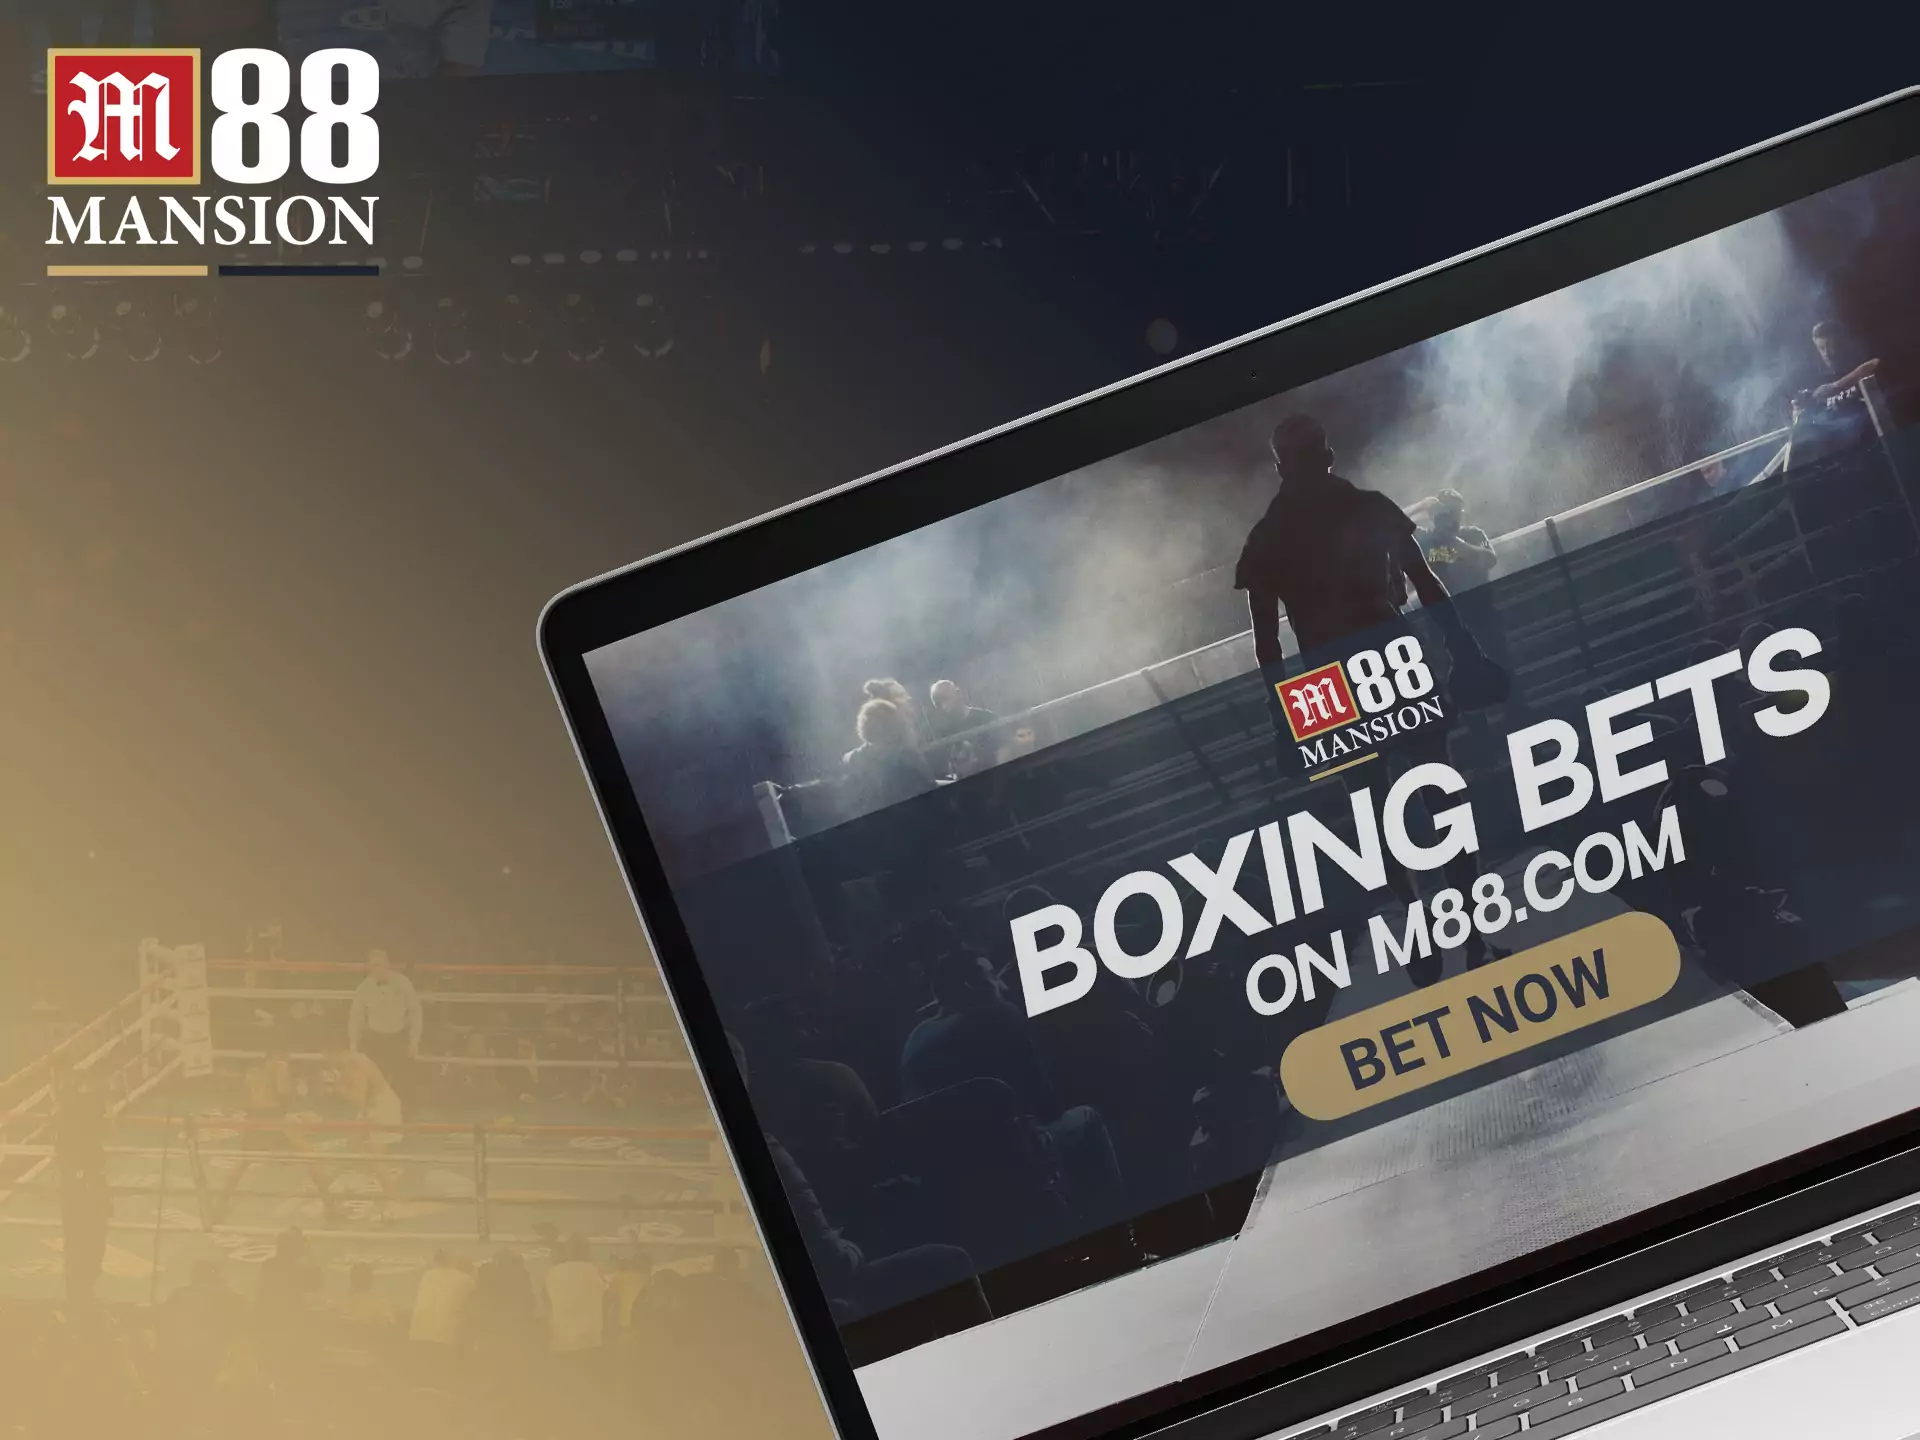 Boxing fights are always available for betting in the M88 sportsbook.